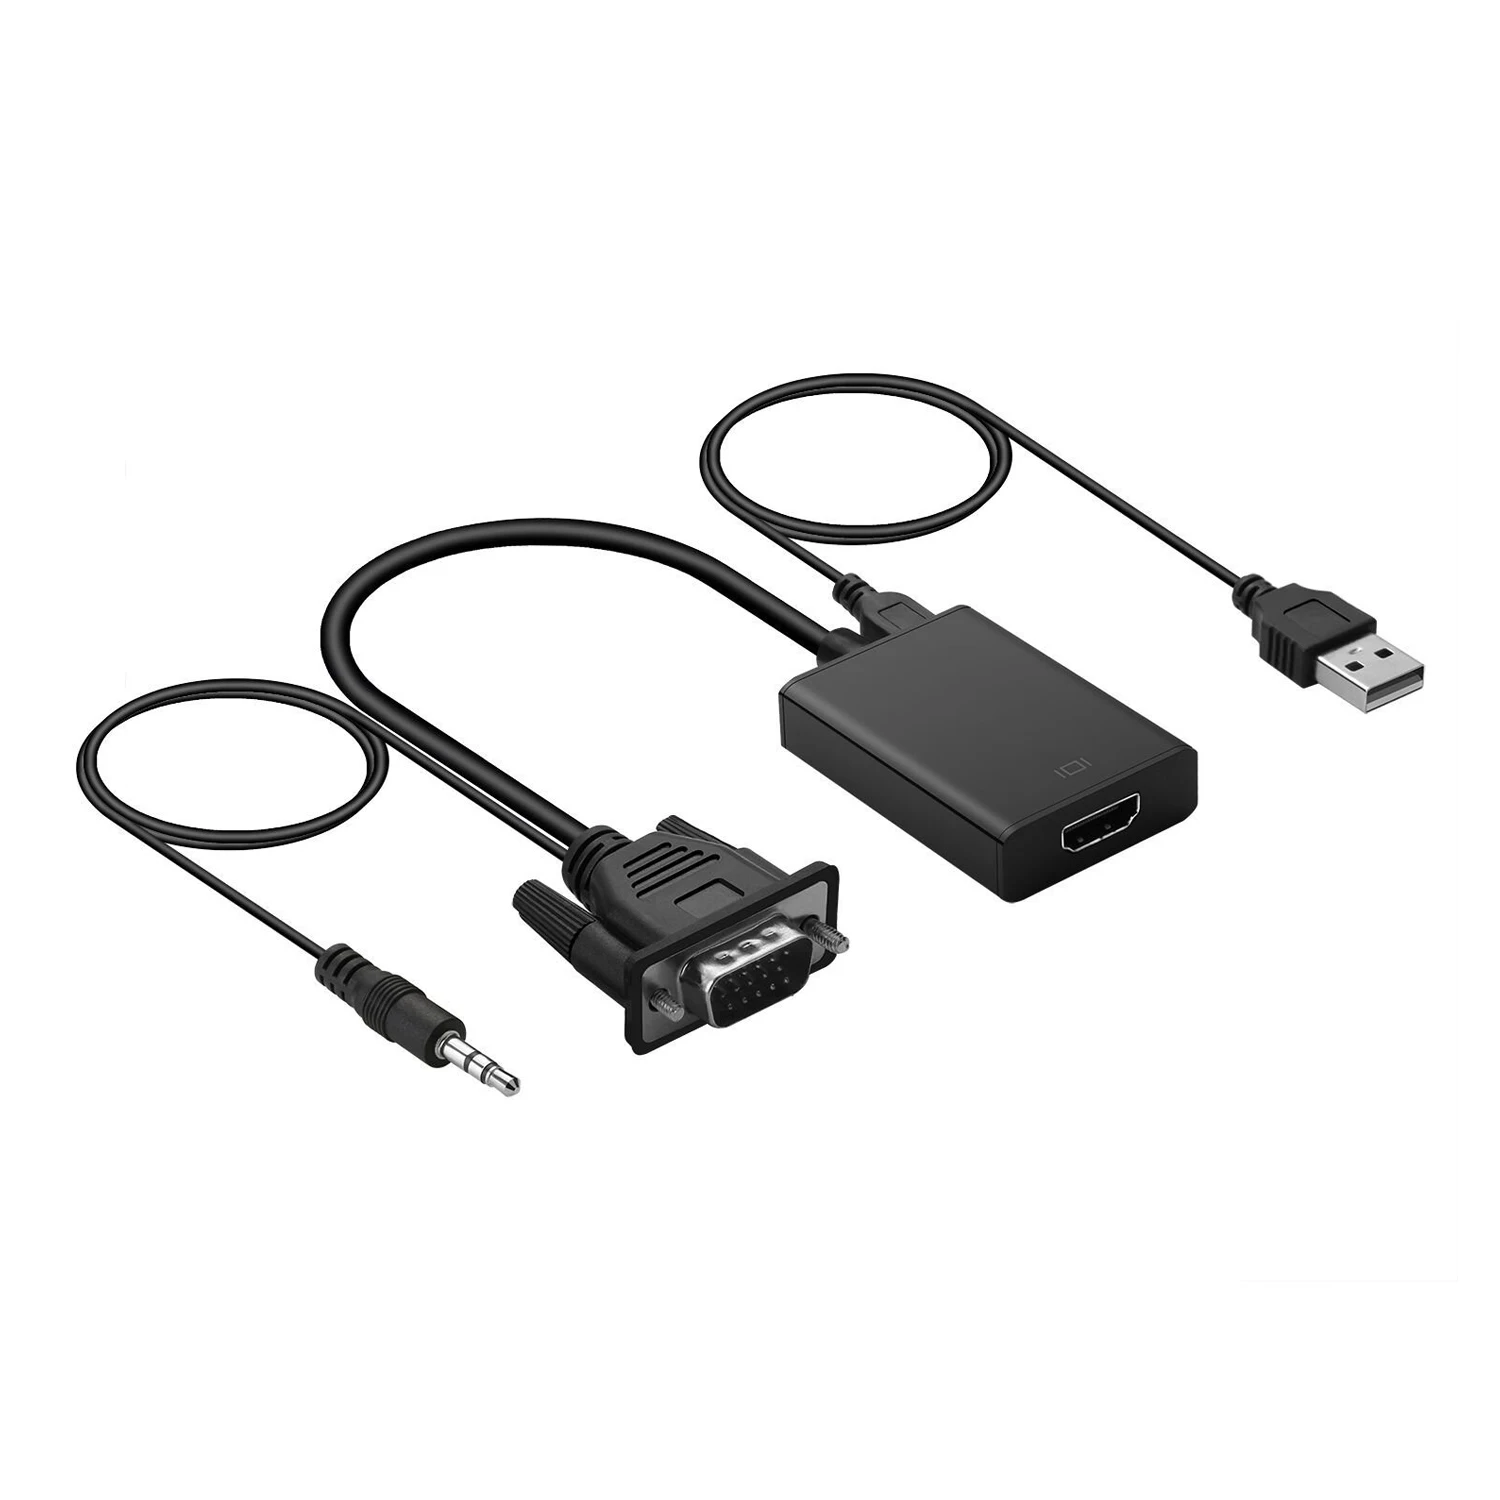 Фото TOP VGA To HDMI Output 1080P HD Audio TV AV HDTV Video Cable Converter Adapter for Connecting PC Laptop Notebook to Di | Электроника